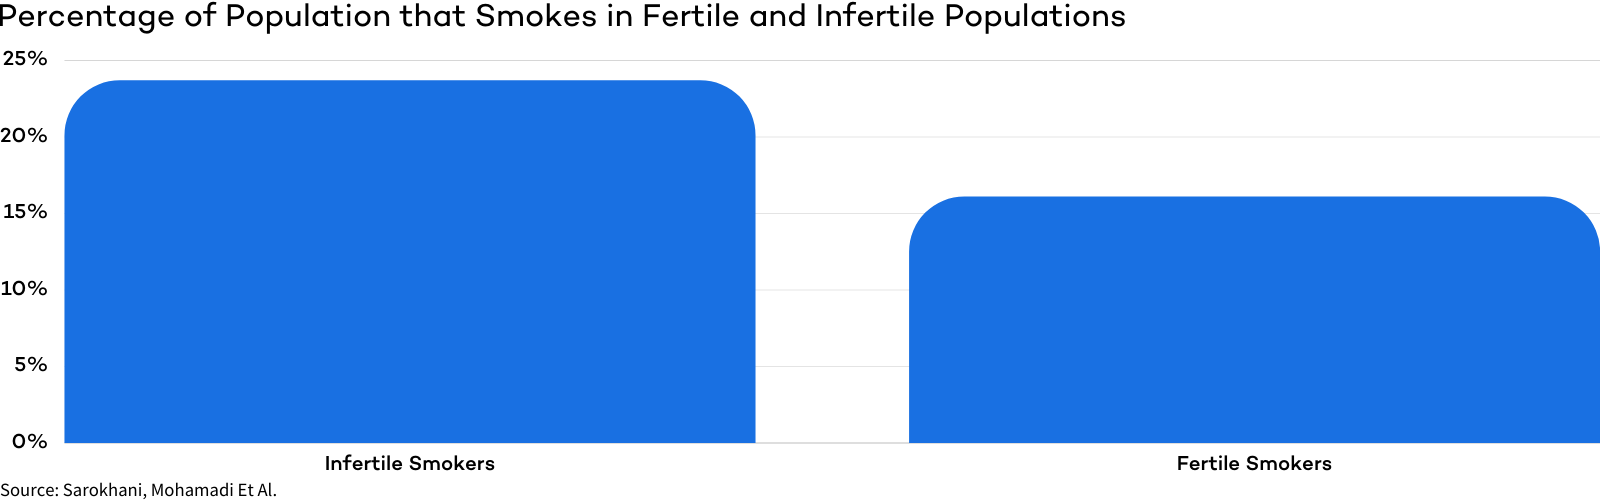 Smoking in Fertile and Infertile Populations